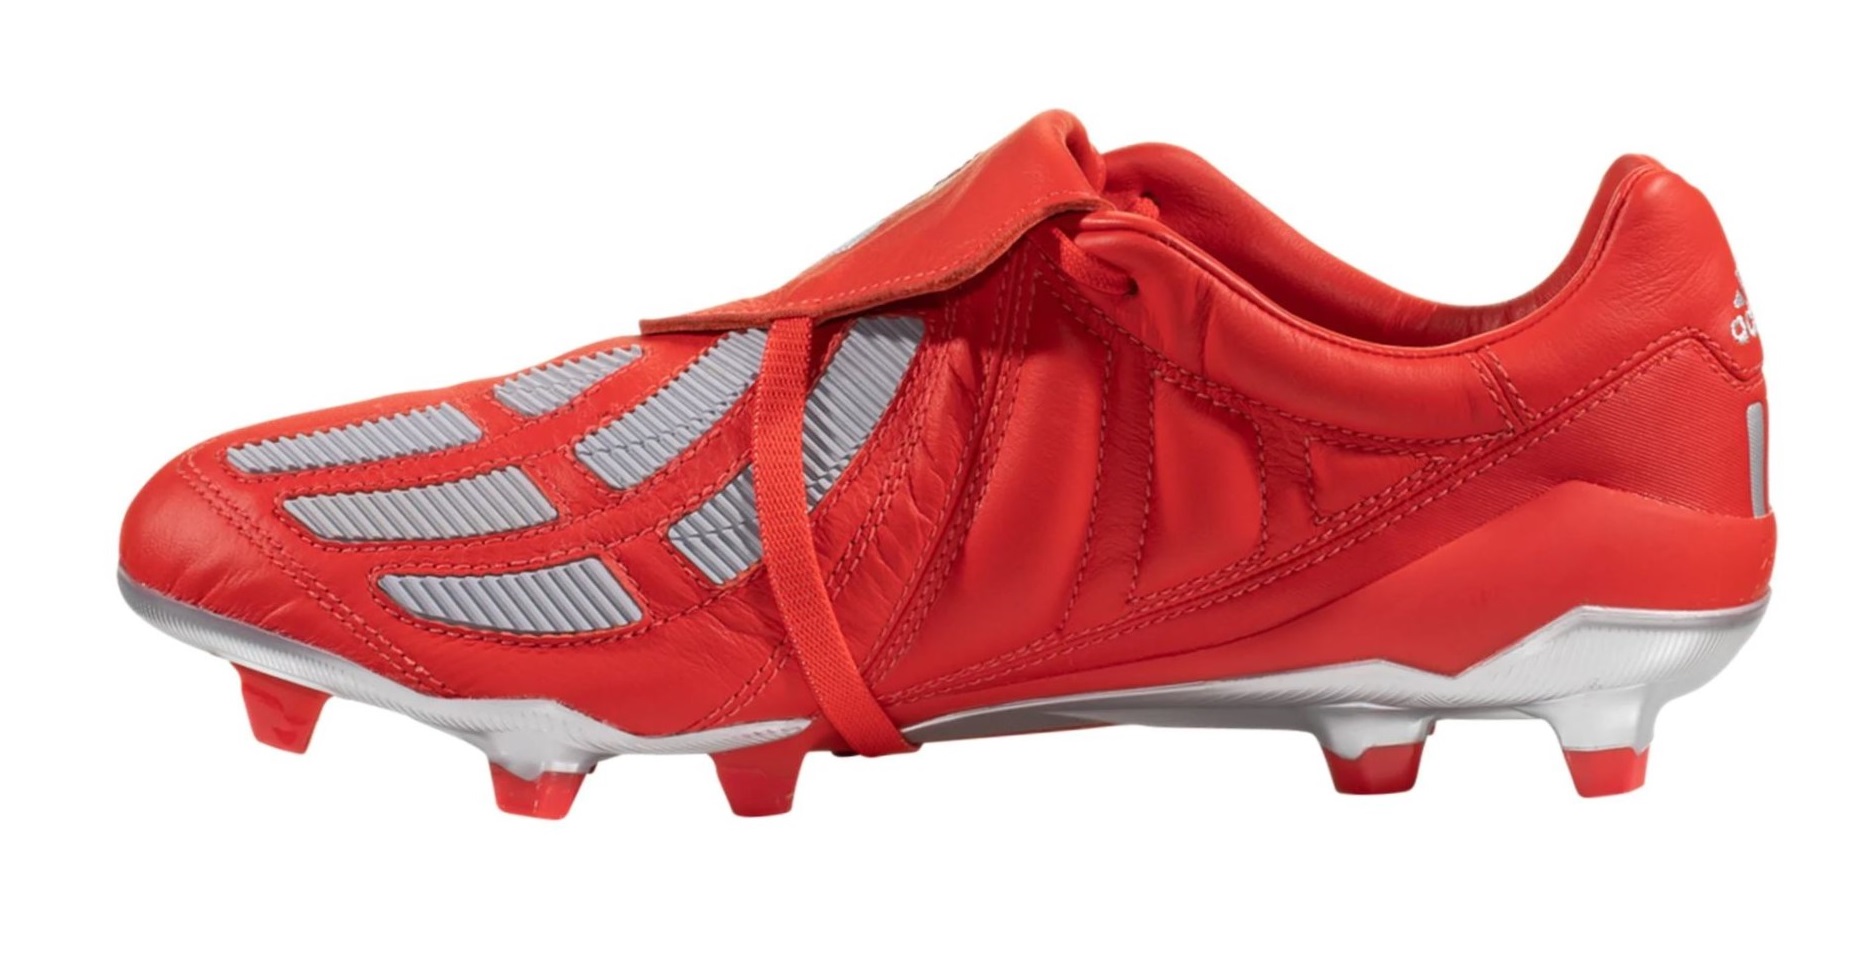 new adidas cleats 2019